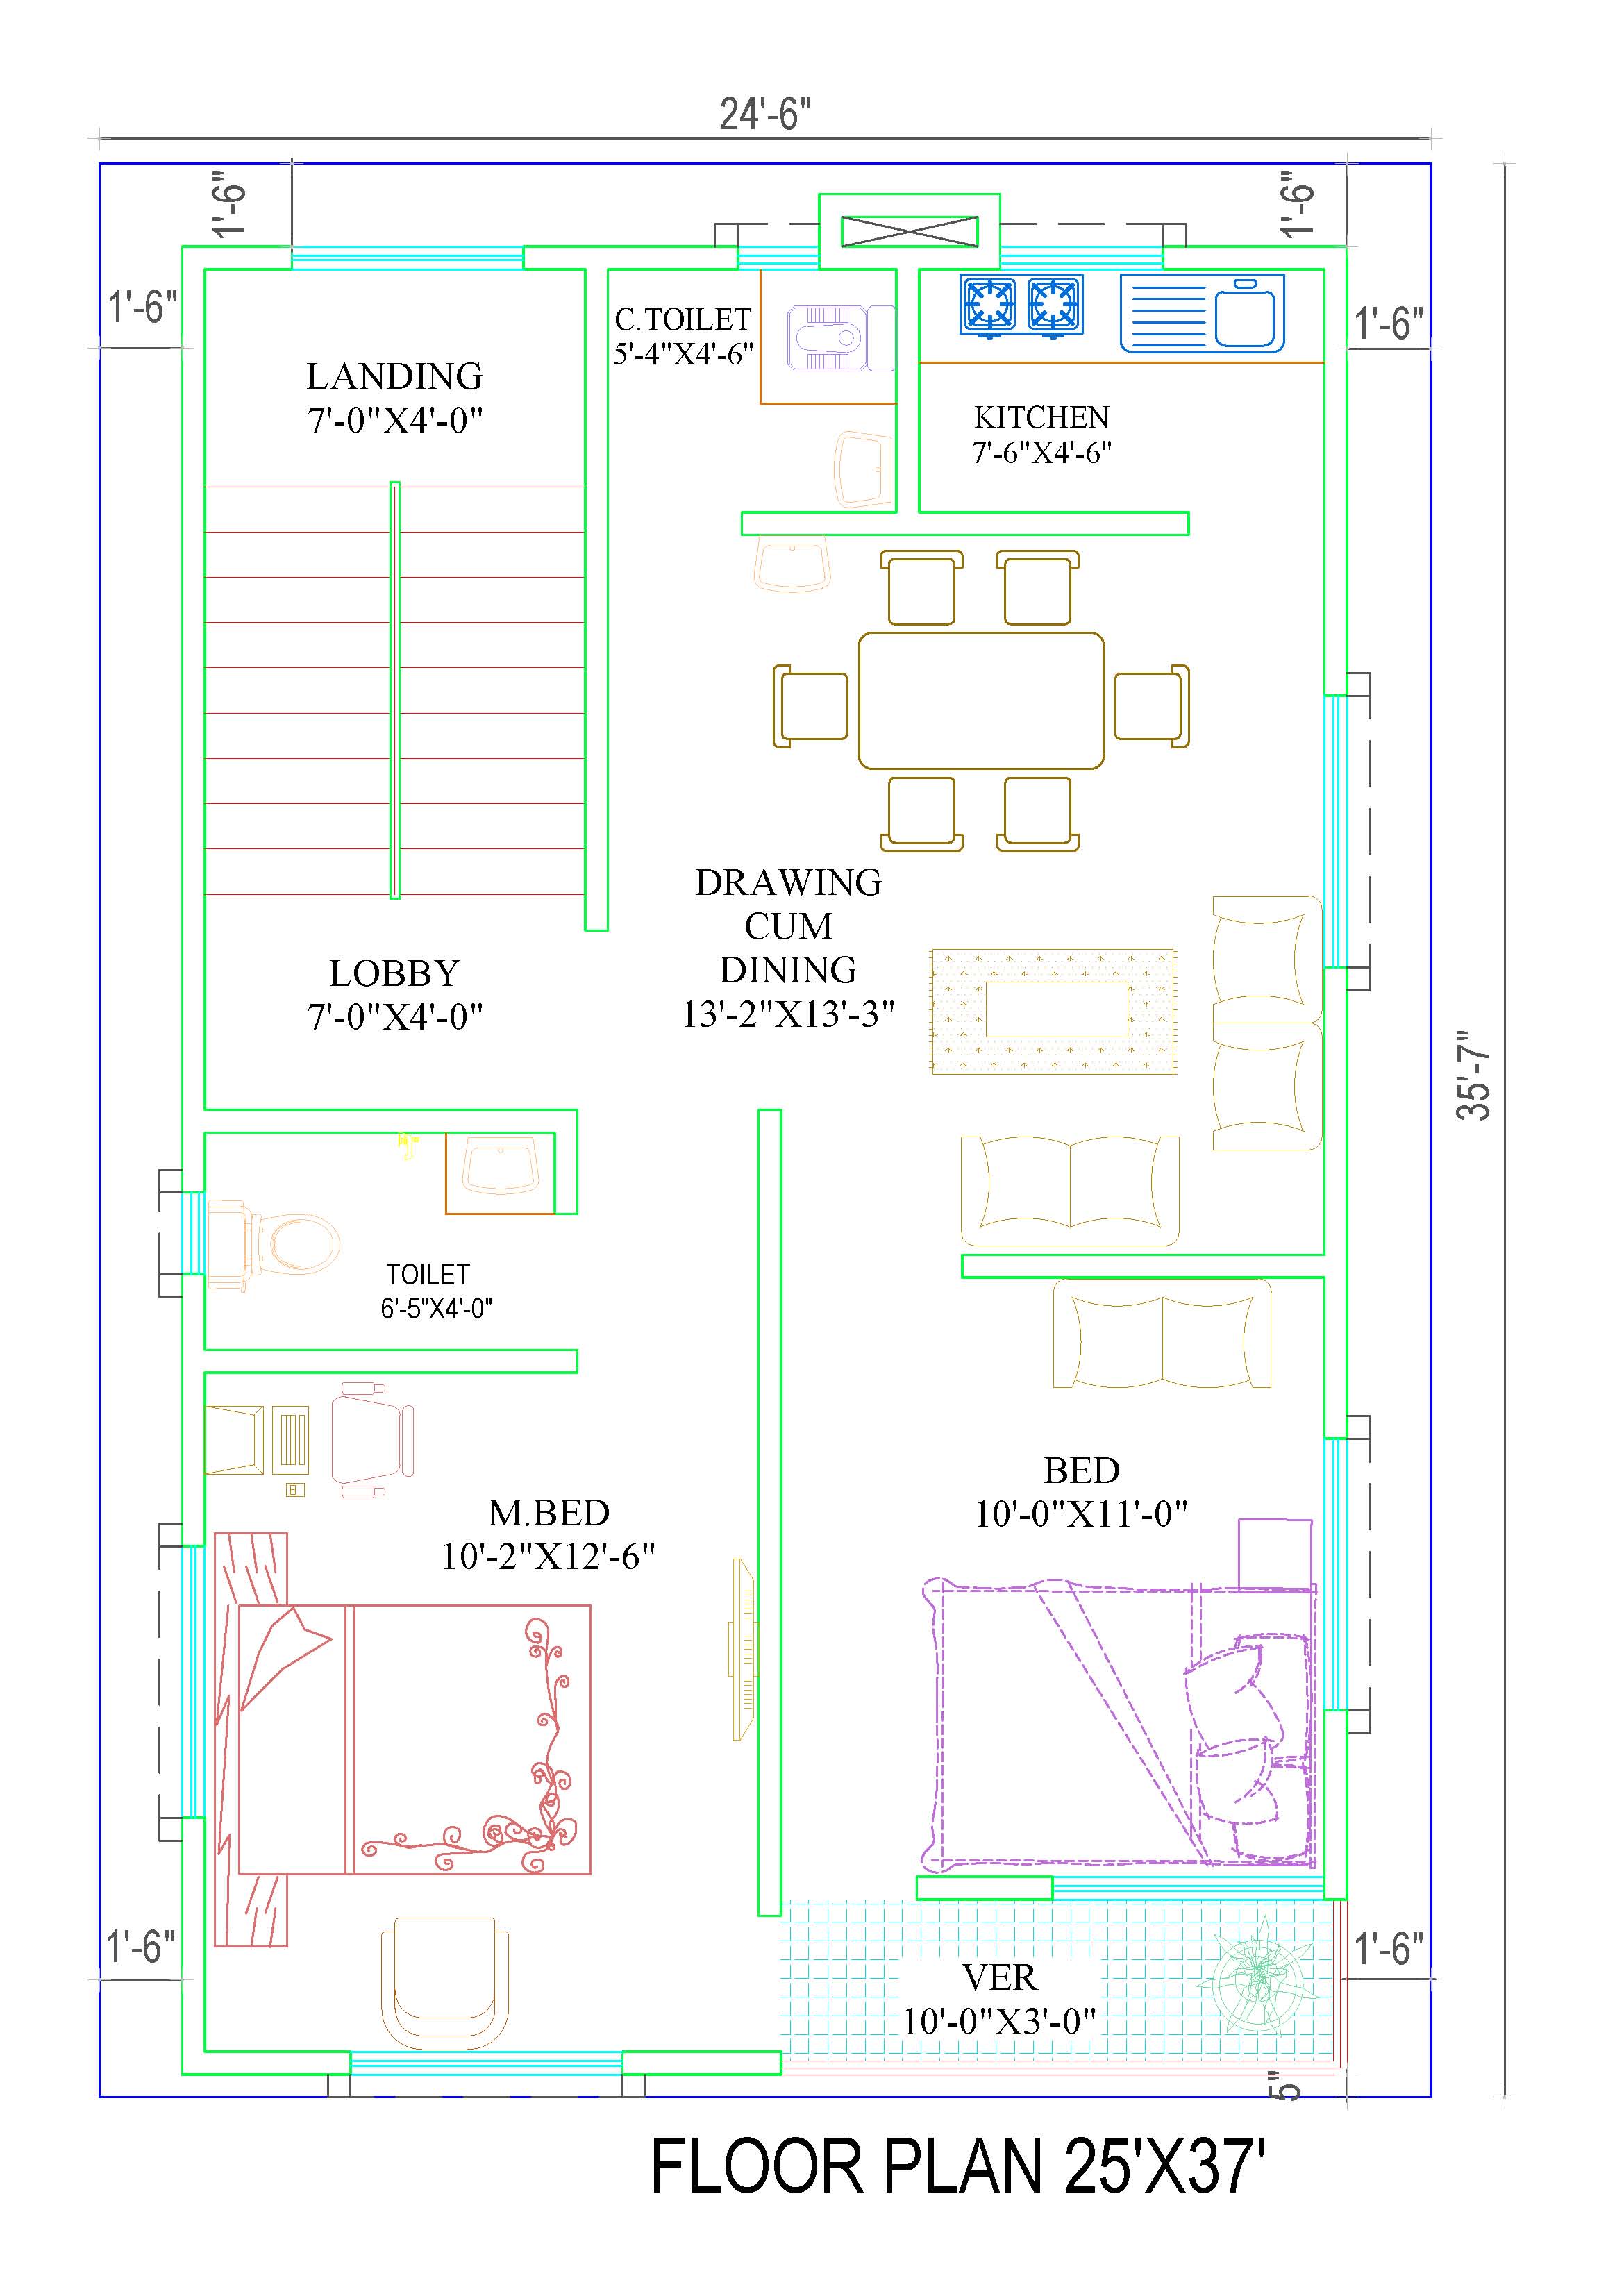 Floor Plan: 25'X37' for single family - CAD Files, DWG files, Plans and ...